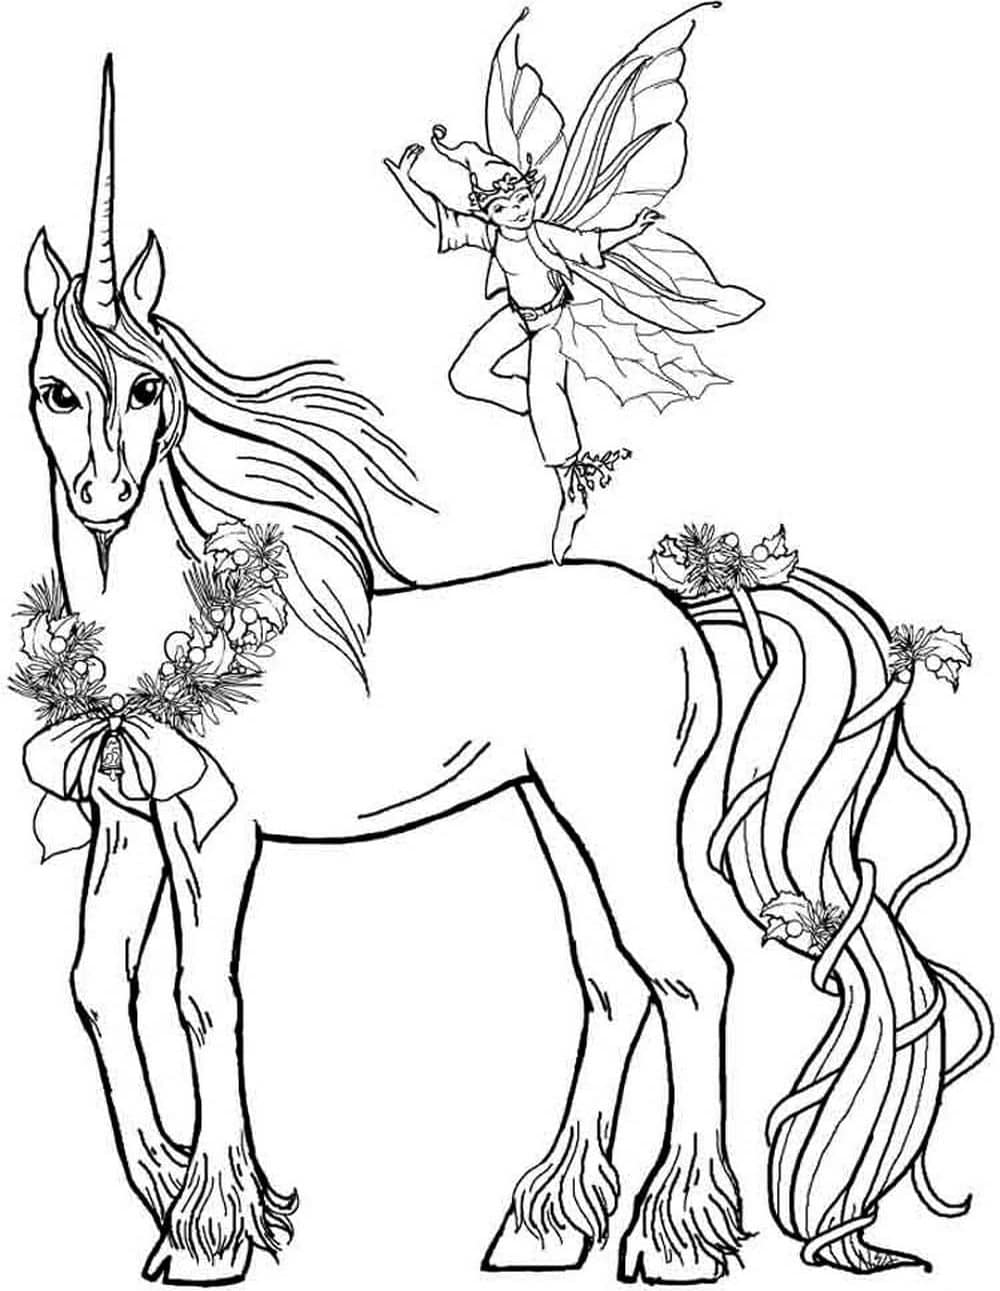 Fairy And Unicorn Coloring Page - Free Printable Coloring Pages for Kids